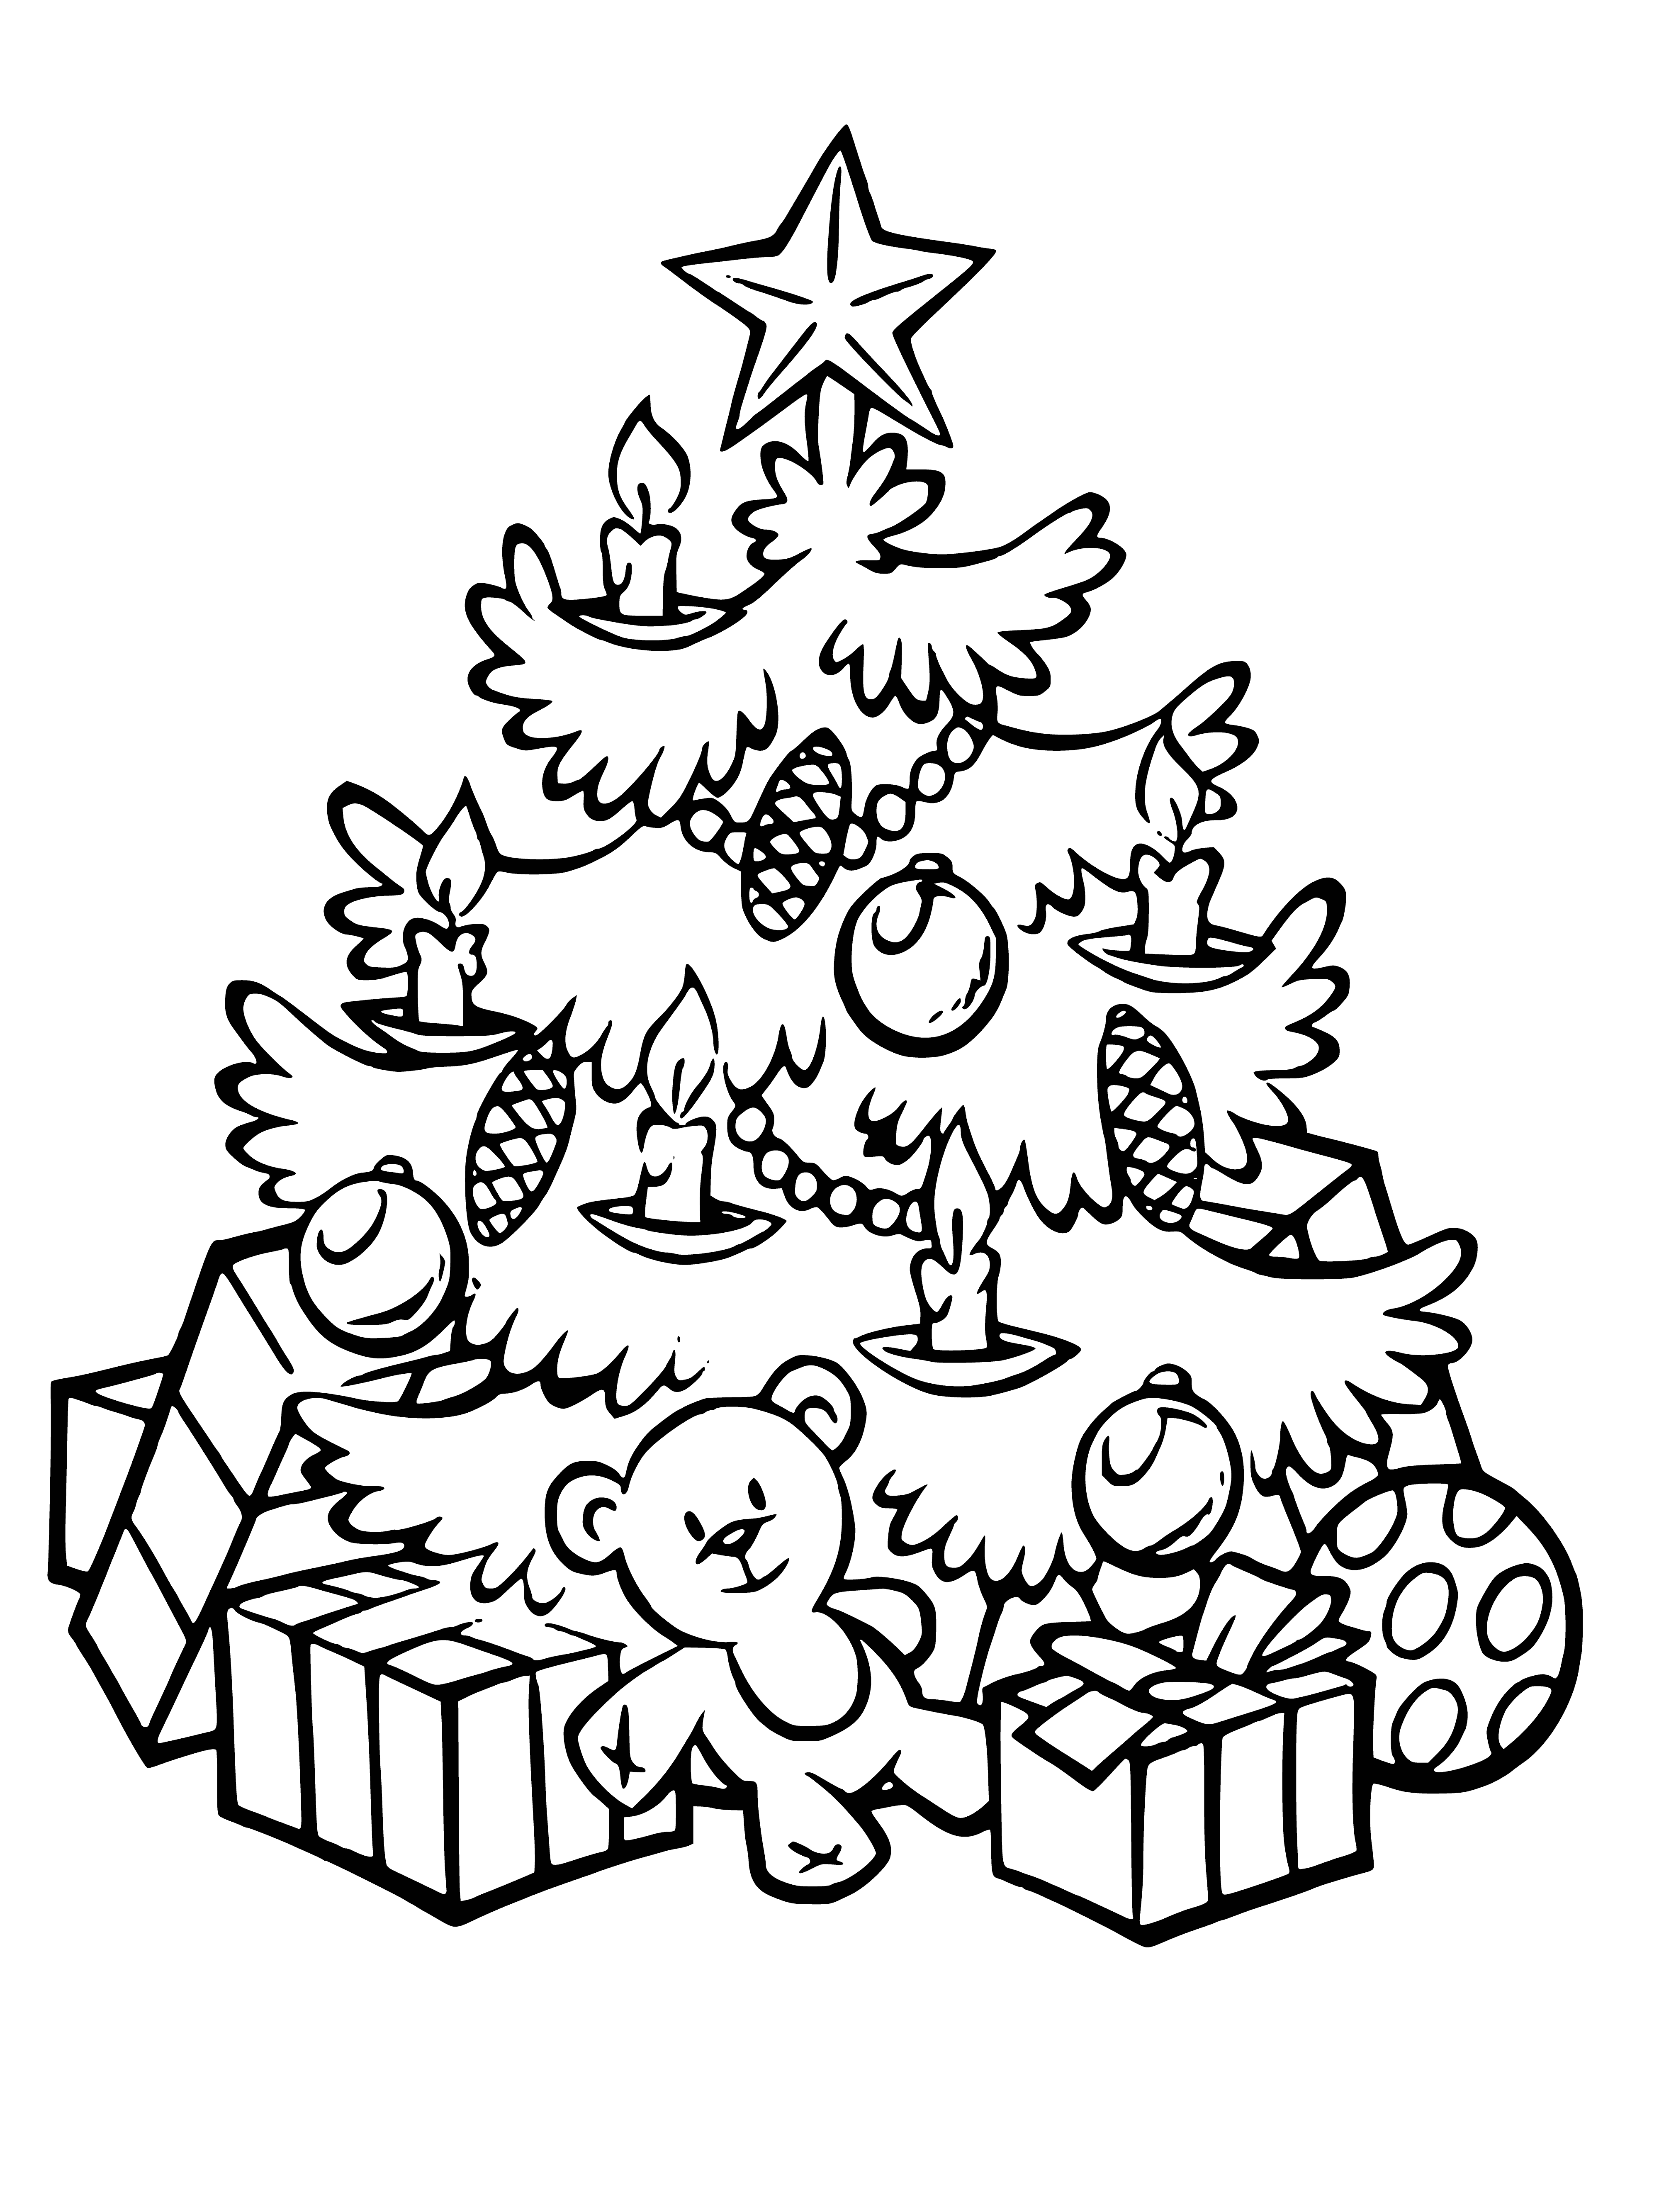 coloring page: Families decorate Christmas trees with presents of different colors to celebrate the holiday season.